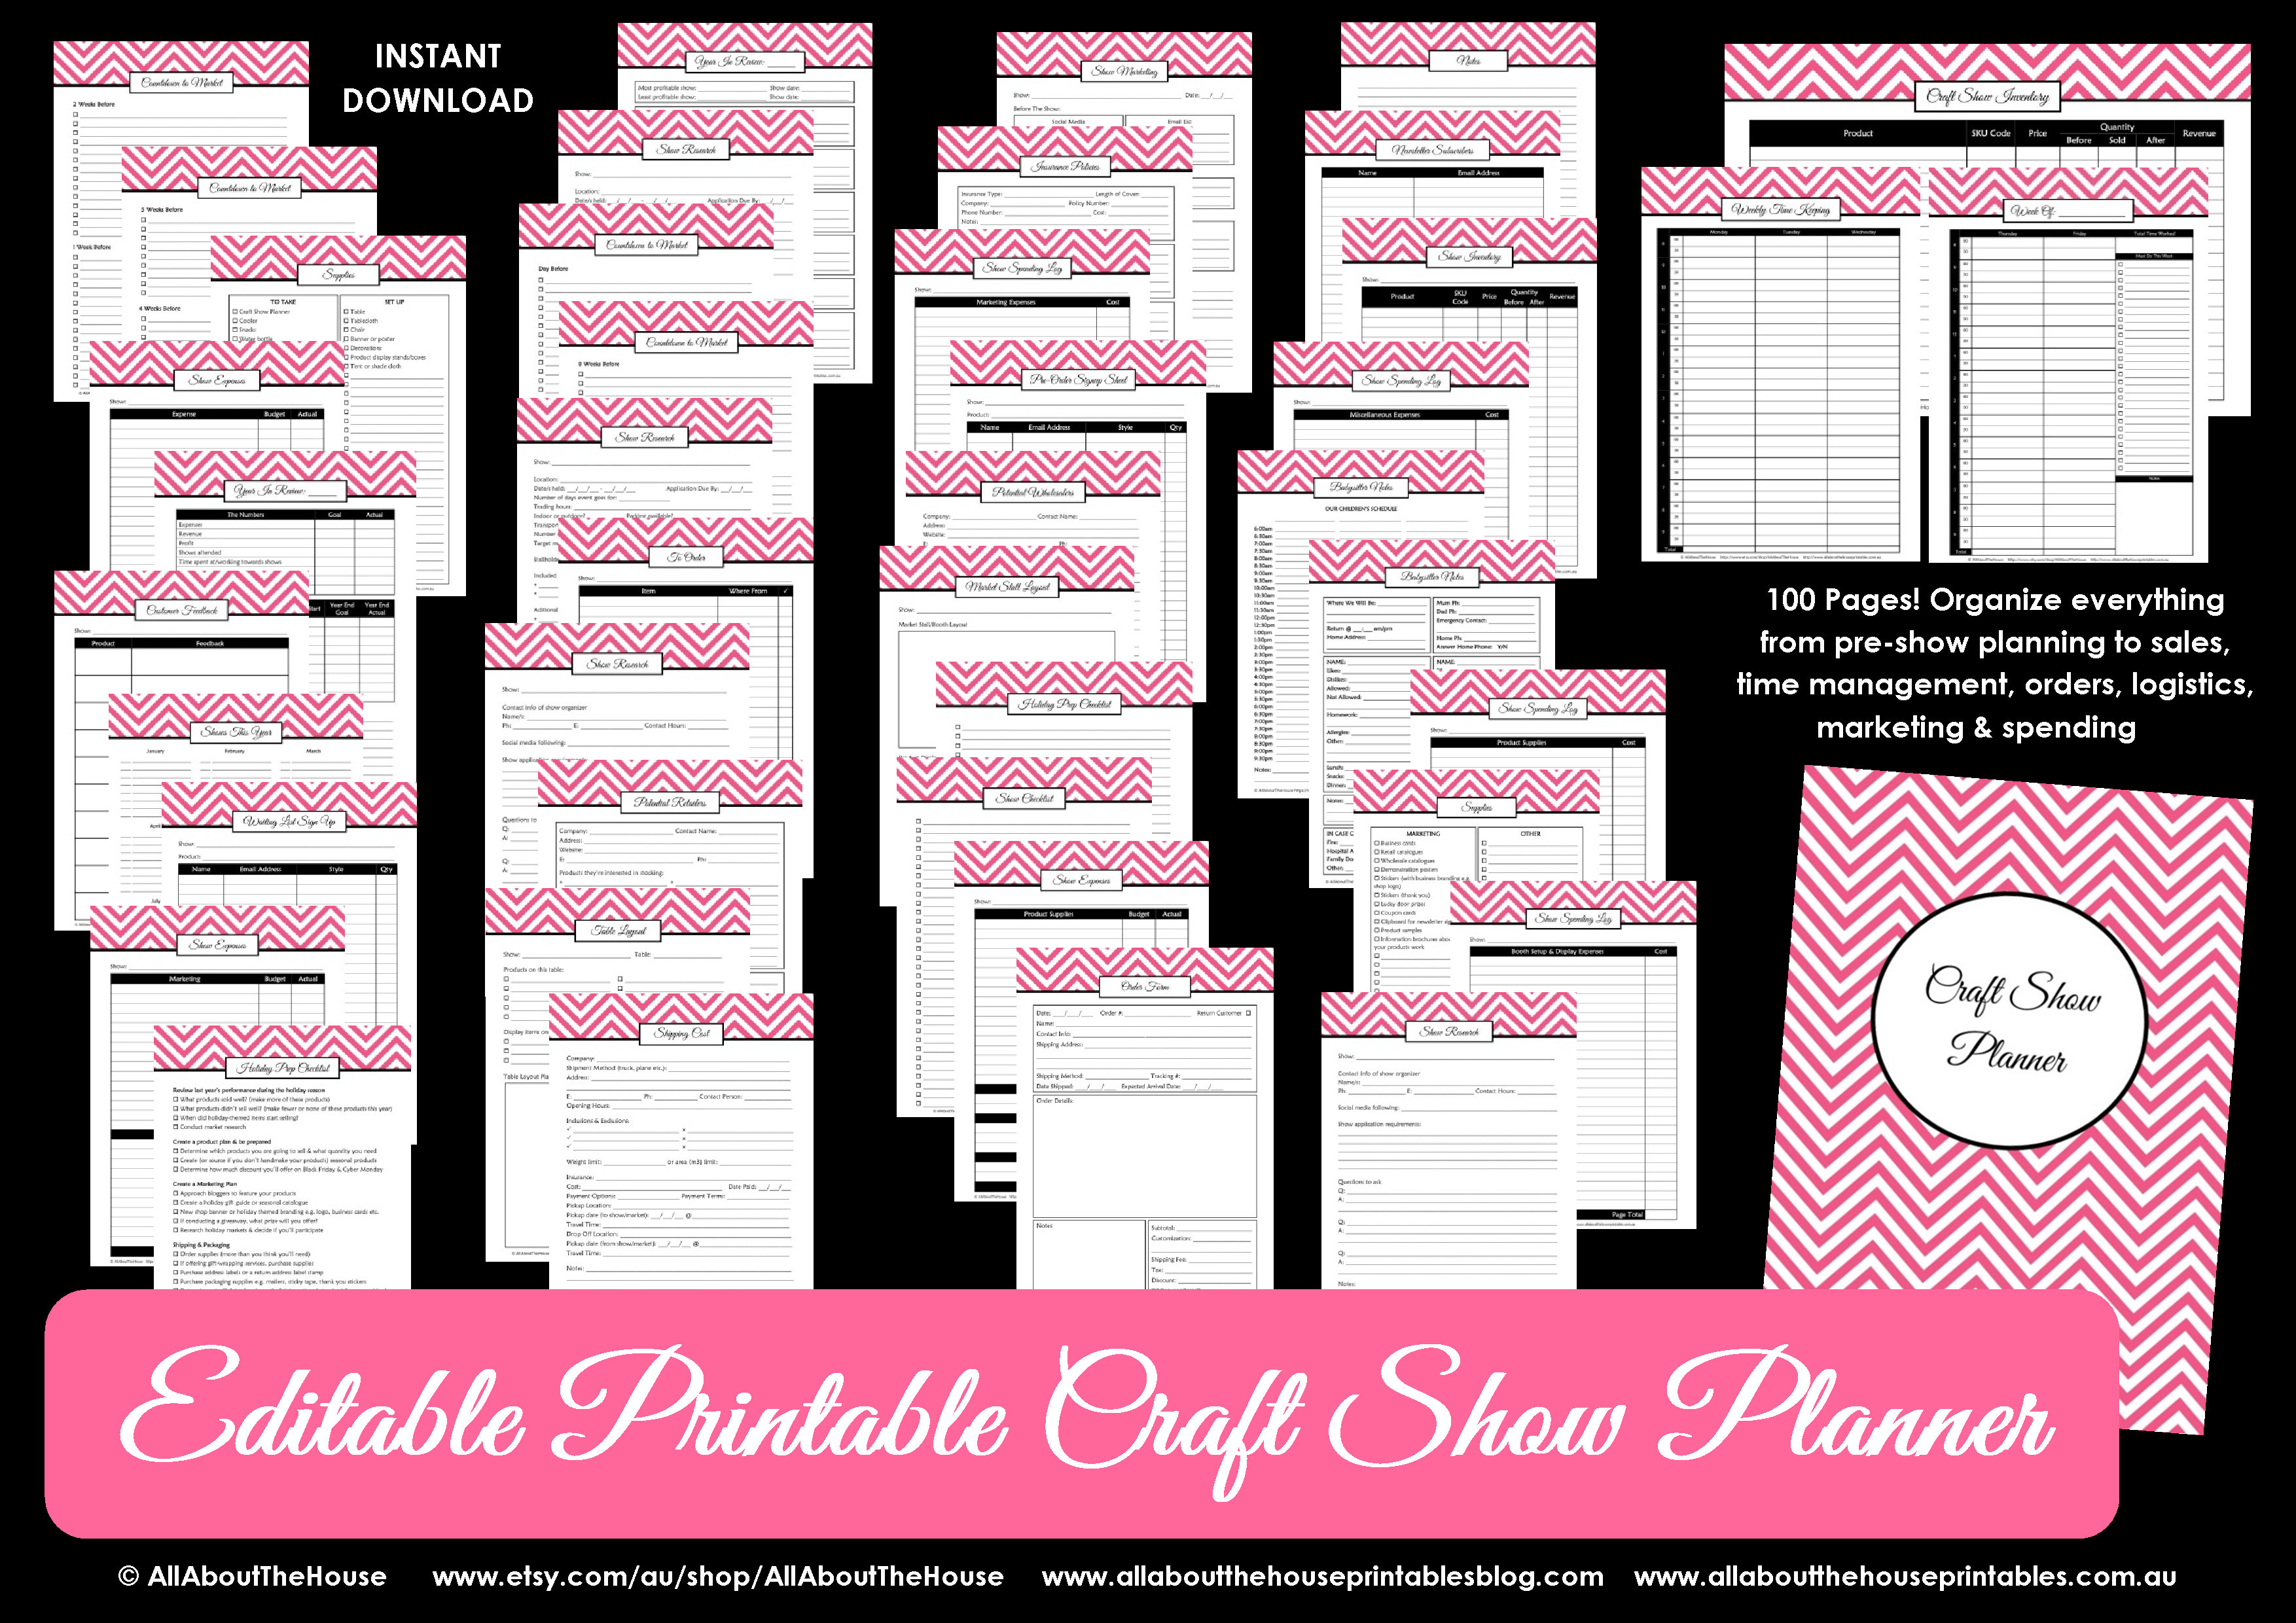 Printable Craft Show Planner for Handmade Markets and Trade Shows